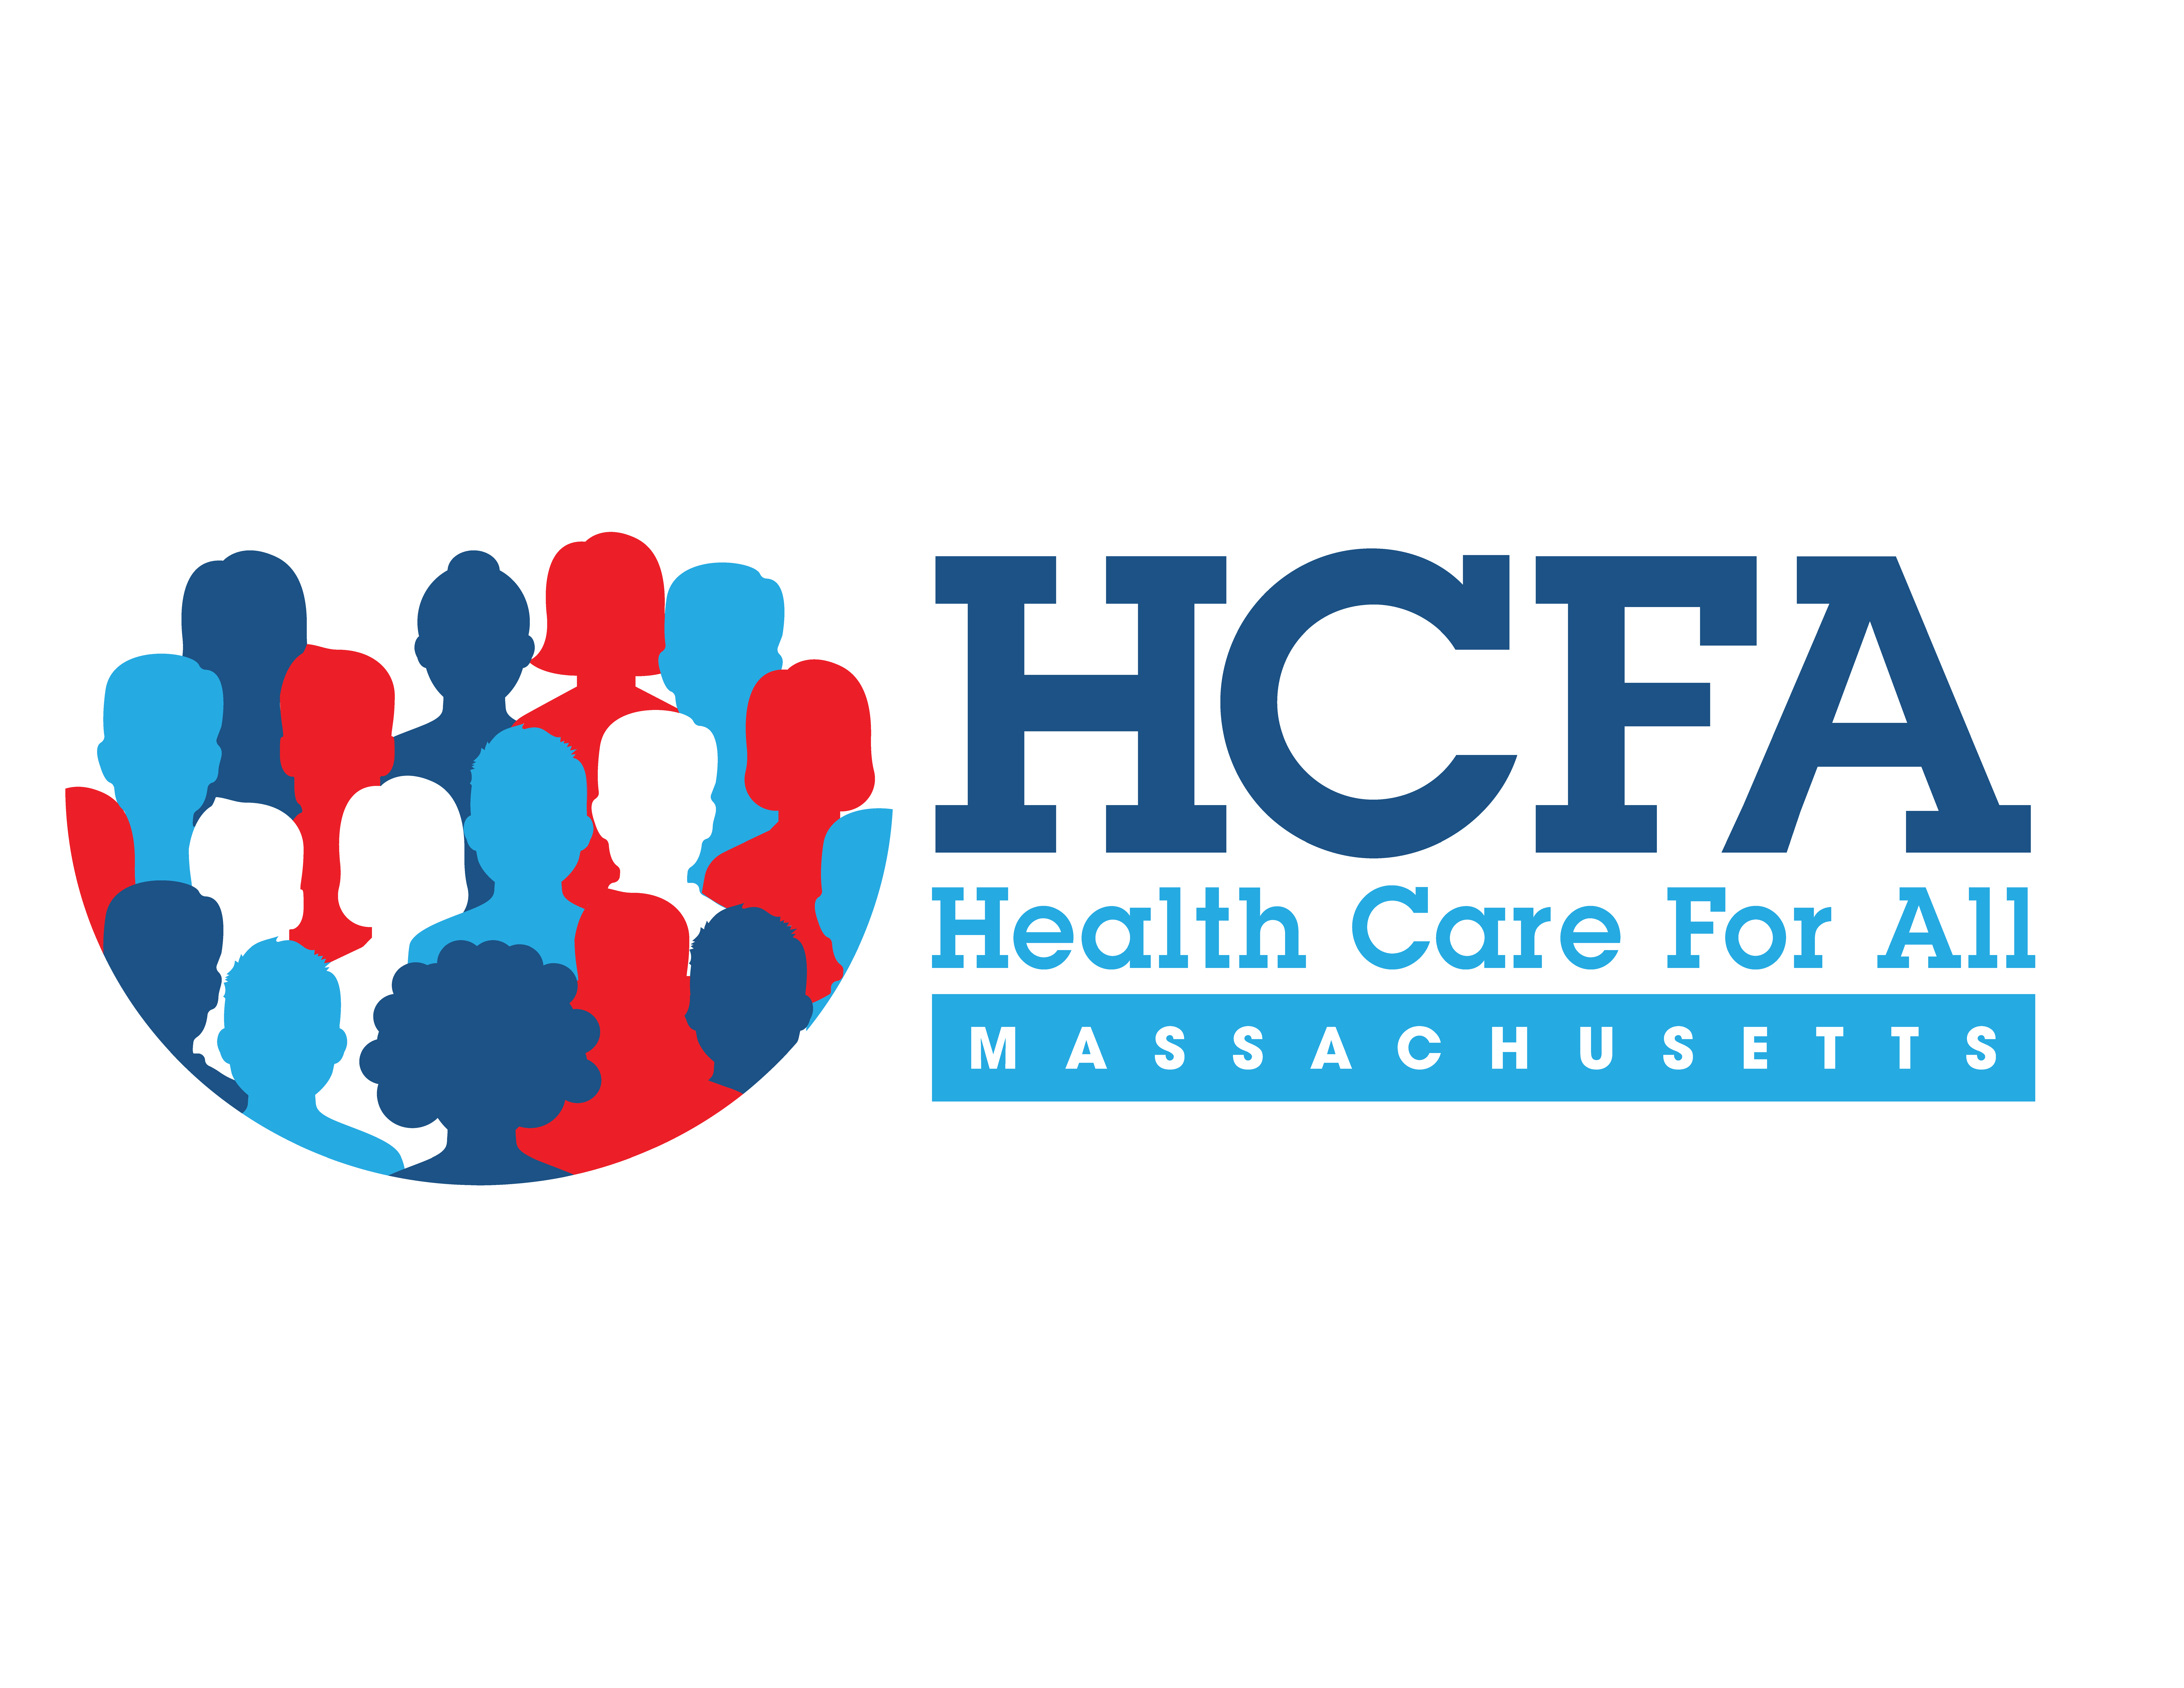 PRESS STATEMENT: Statement from Health Care for All Executive Director Amy Rosenthal on Massachusetts Center for Health Information and Analysis (CHIA) Annual Report